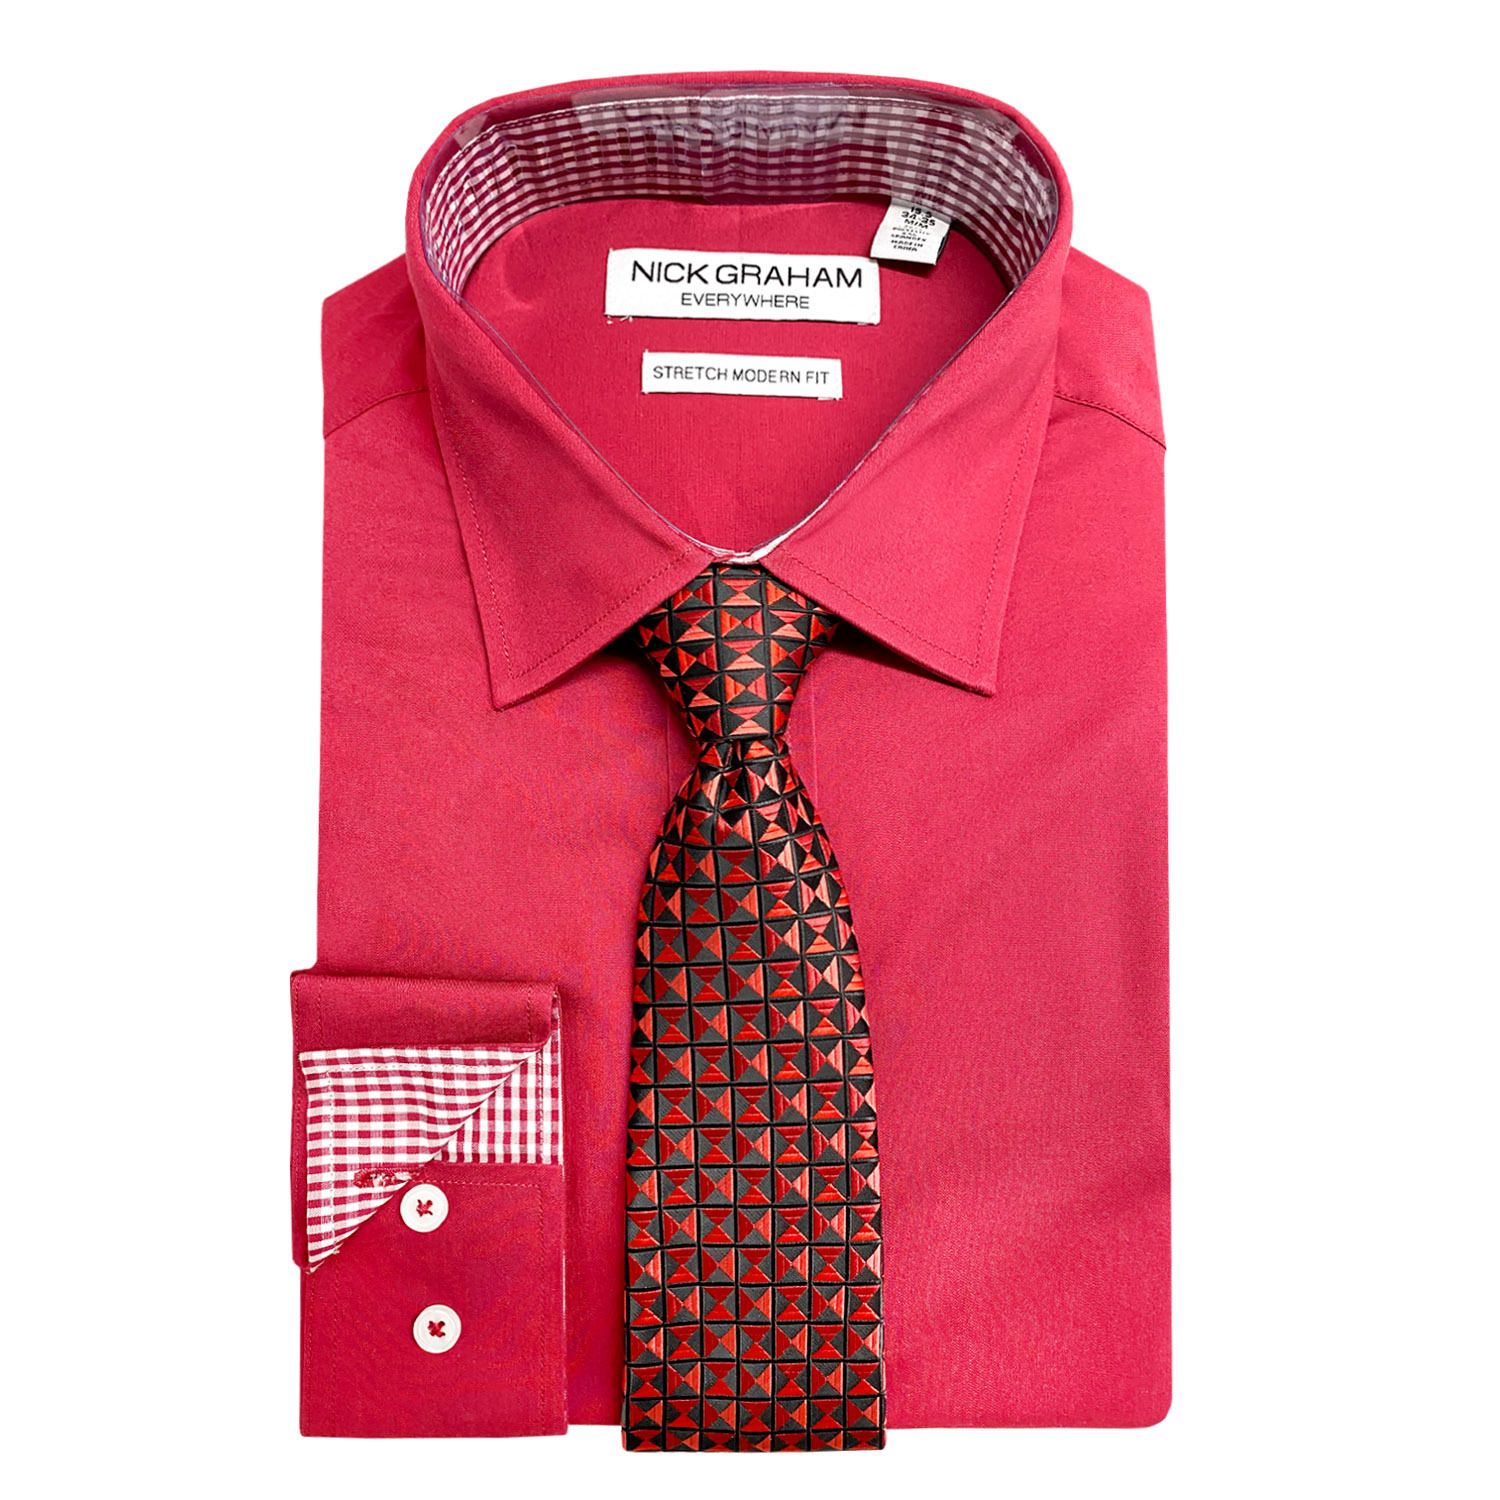 Men's Red Dress Shirts: Add Some Formal ...